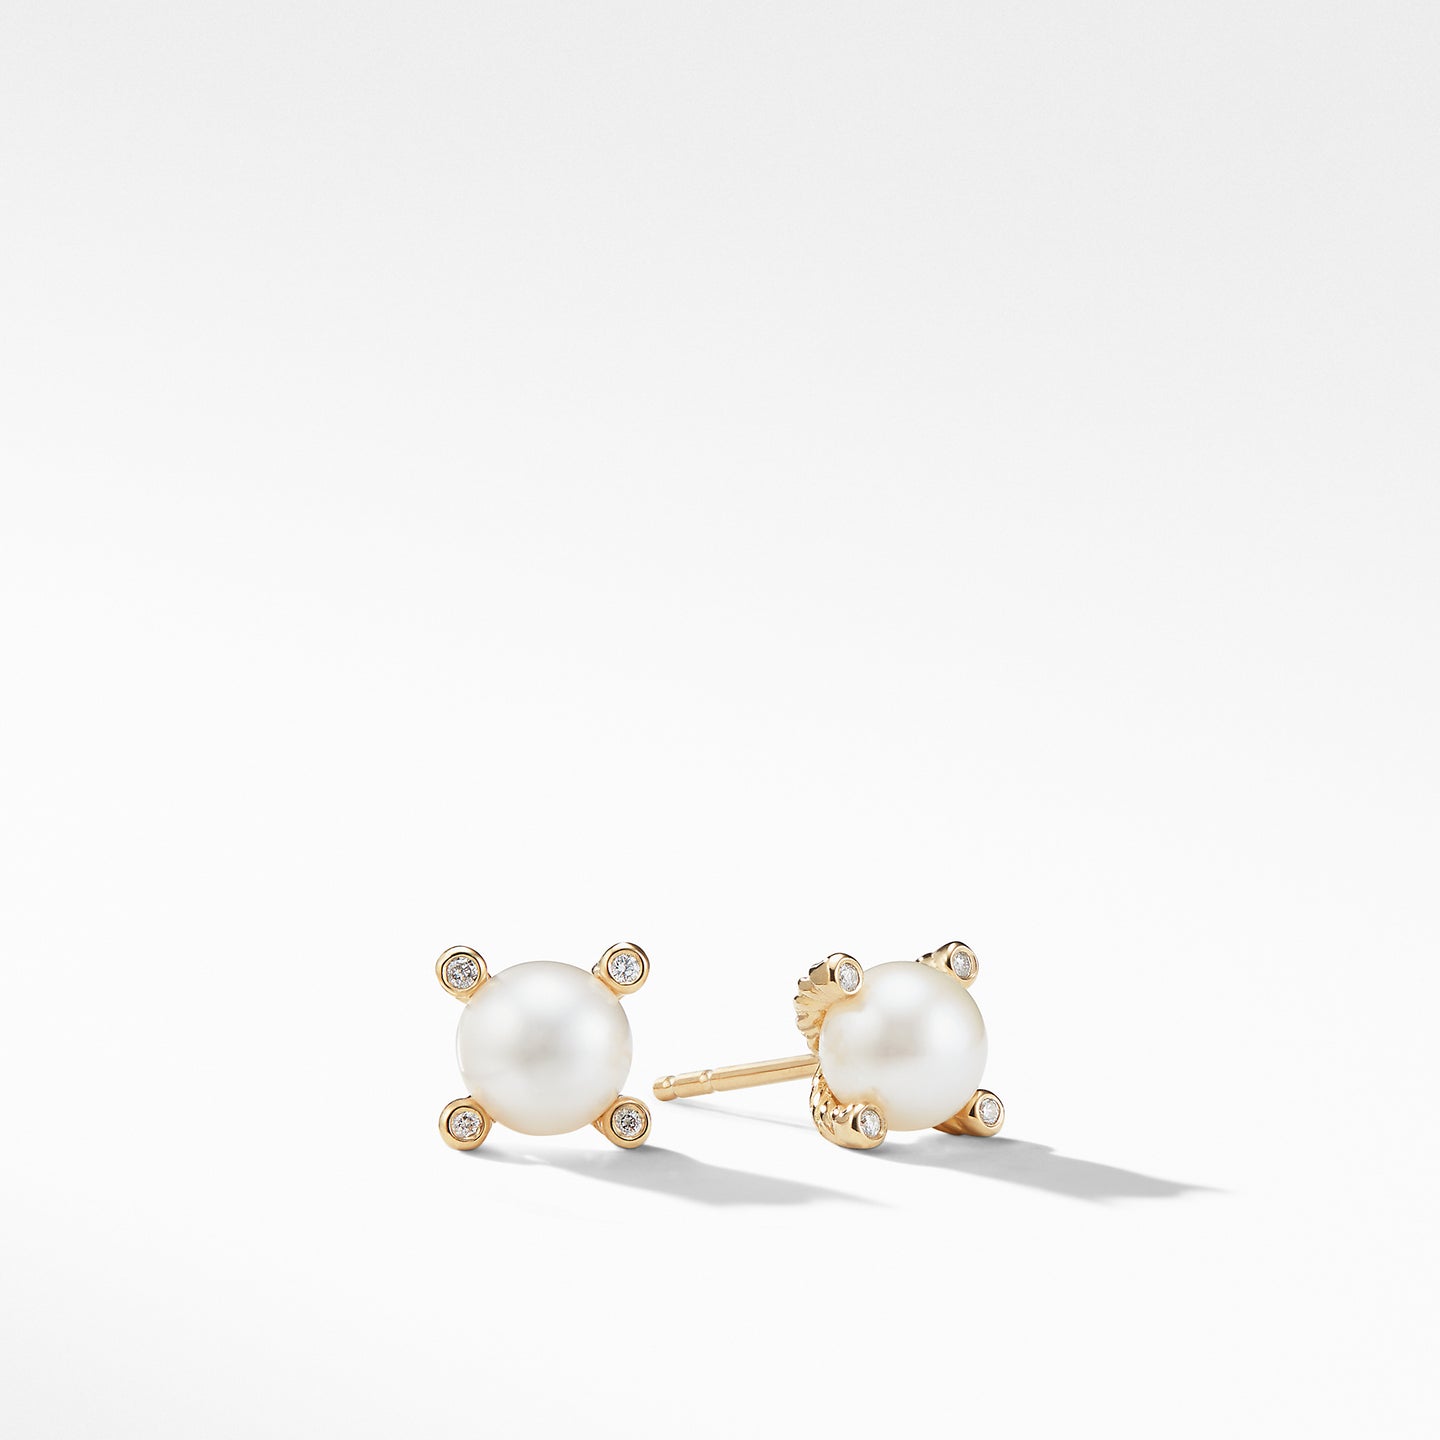 Cable Earrings with Diamonds and Pearls in Gold